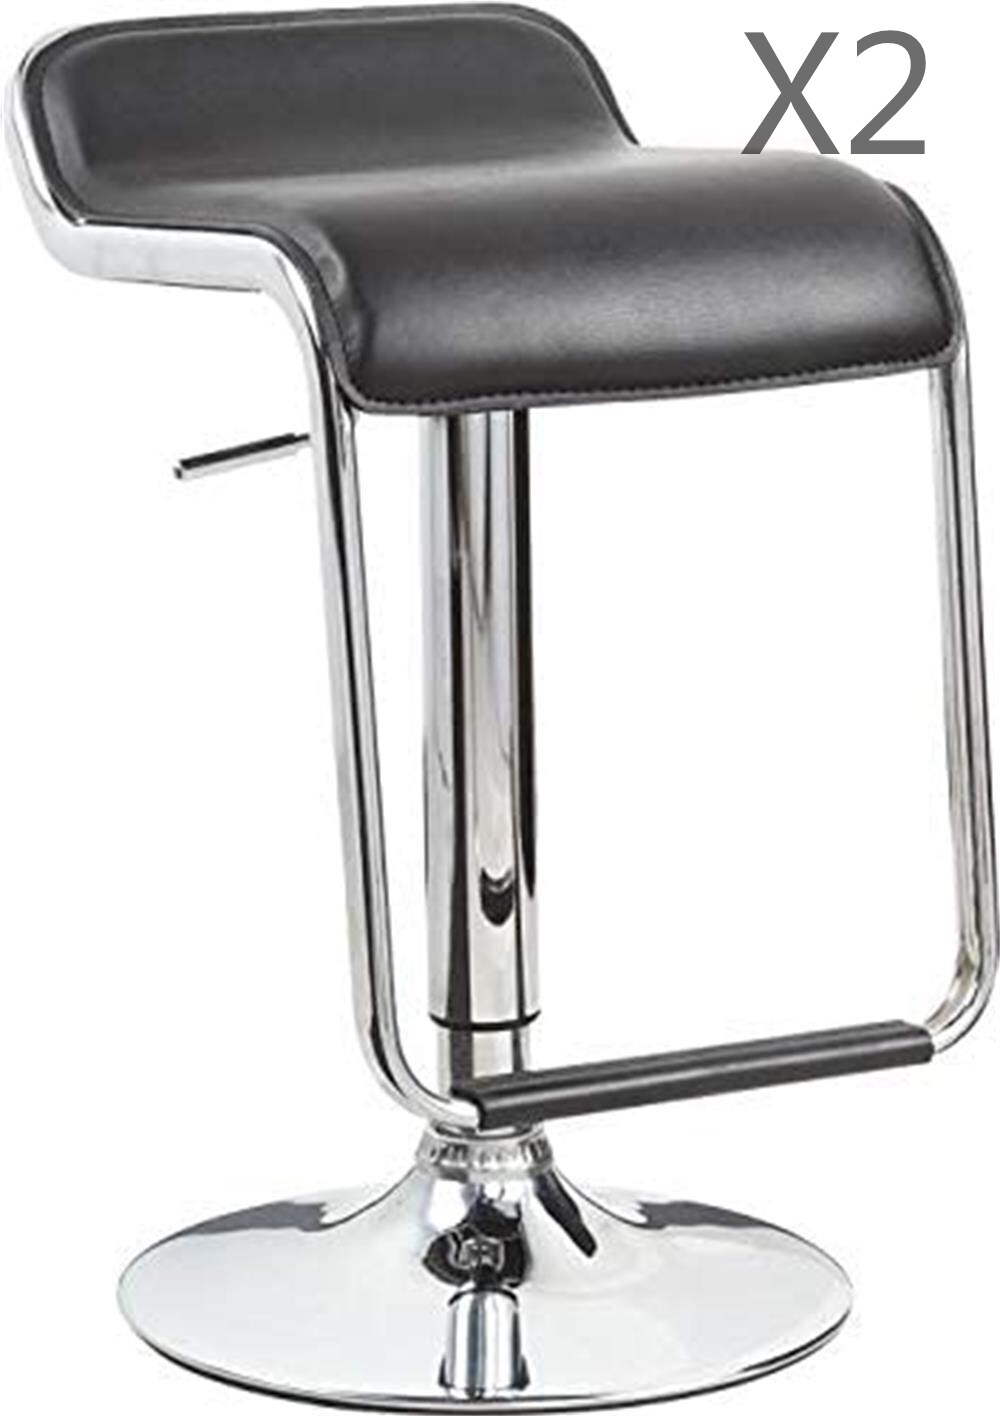 buy lanny set of 2 bar chair office chair bar stool t100g9  adjustableblack online  shop home and garden on carrefour uae